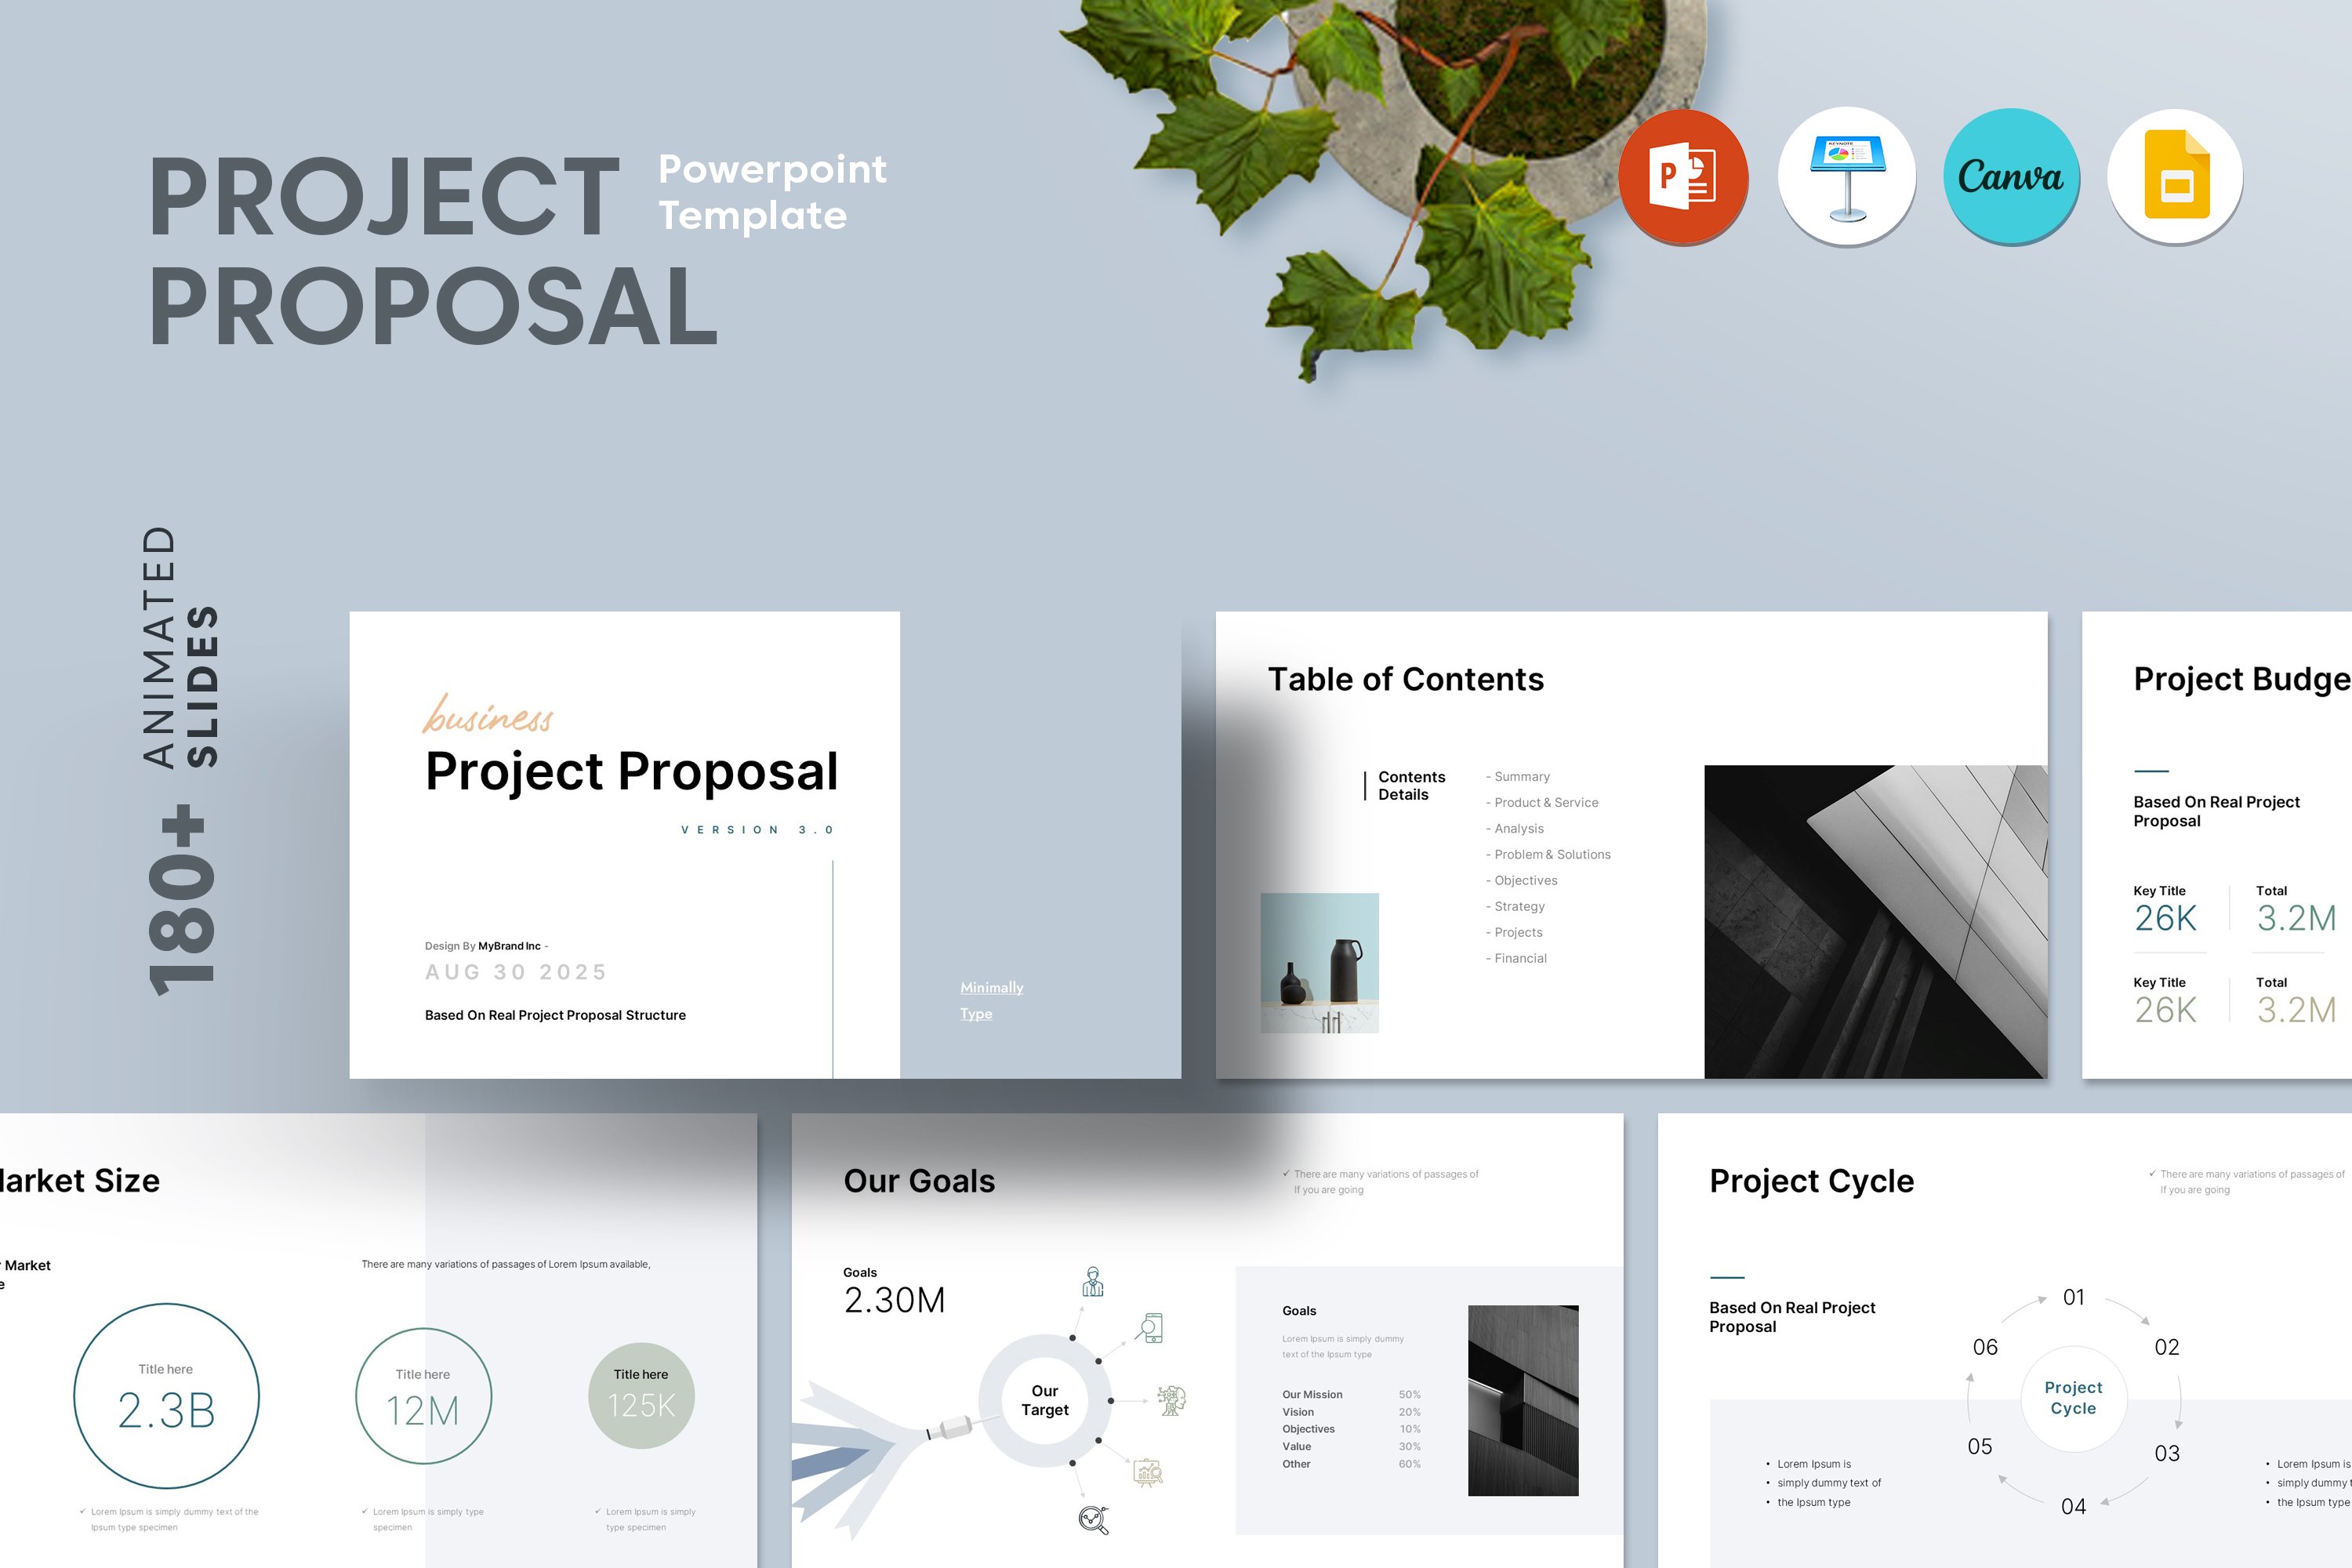 00 project proposal canva powerpoint presentation template 44